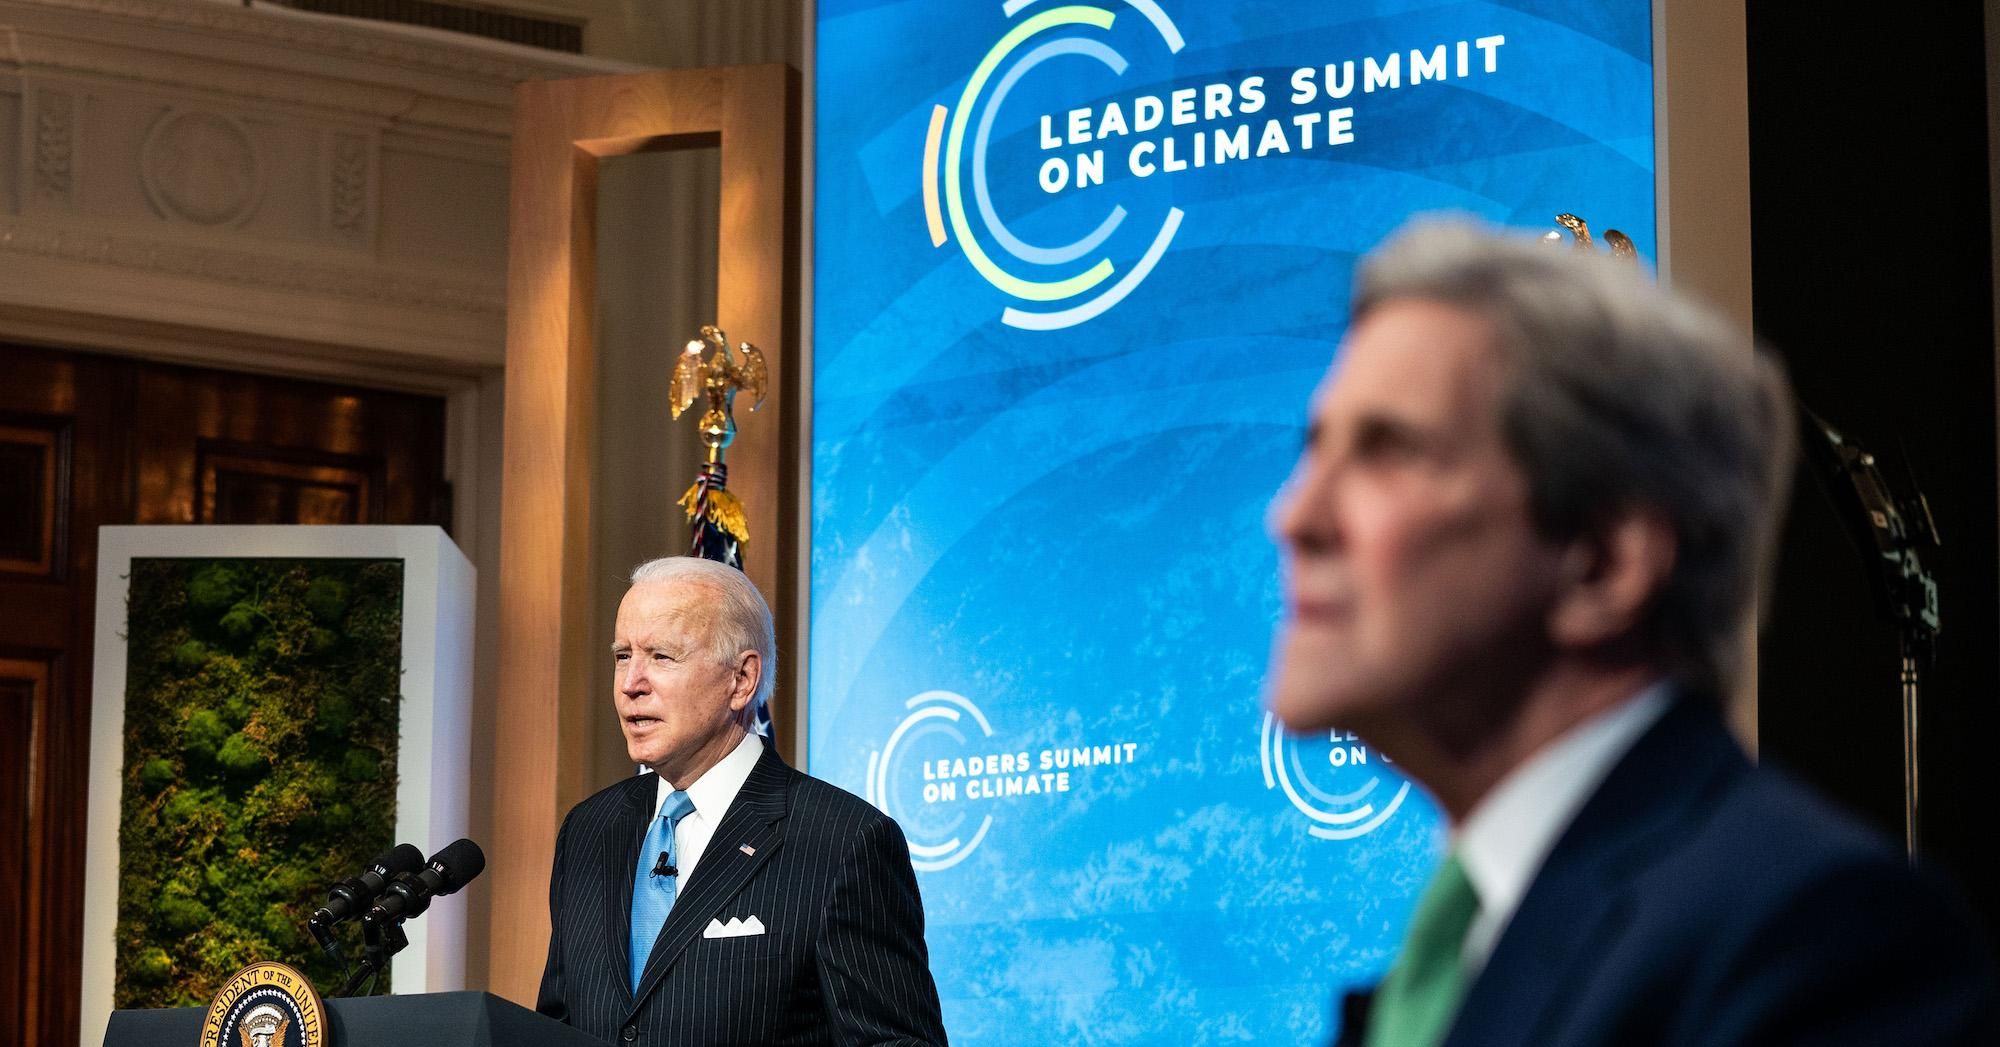 President Joe Biden delivers remarks as Special Presidential Envoy for Climate and former Secretary of State John Kerry listens during day 2 of the virtual Leaders Summit on Climate at the East Room of the White House April 23, 2021 in Washington, D.C. 